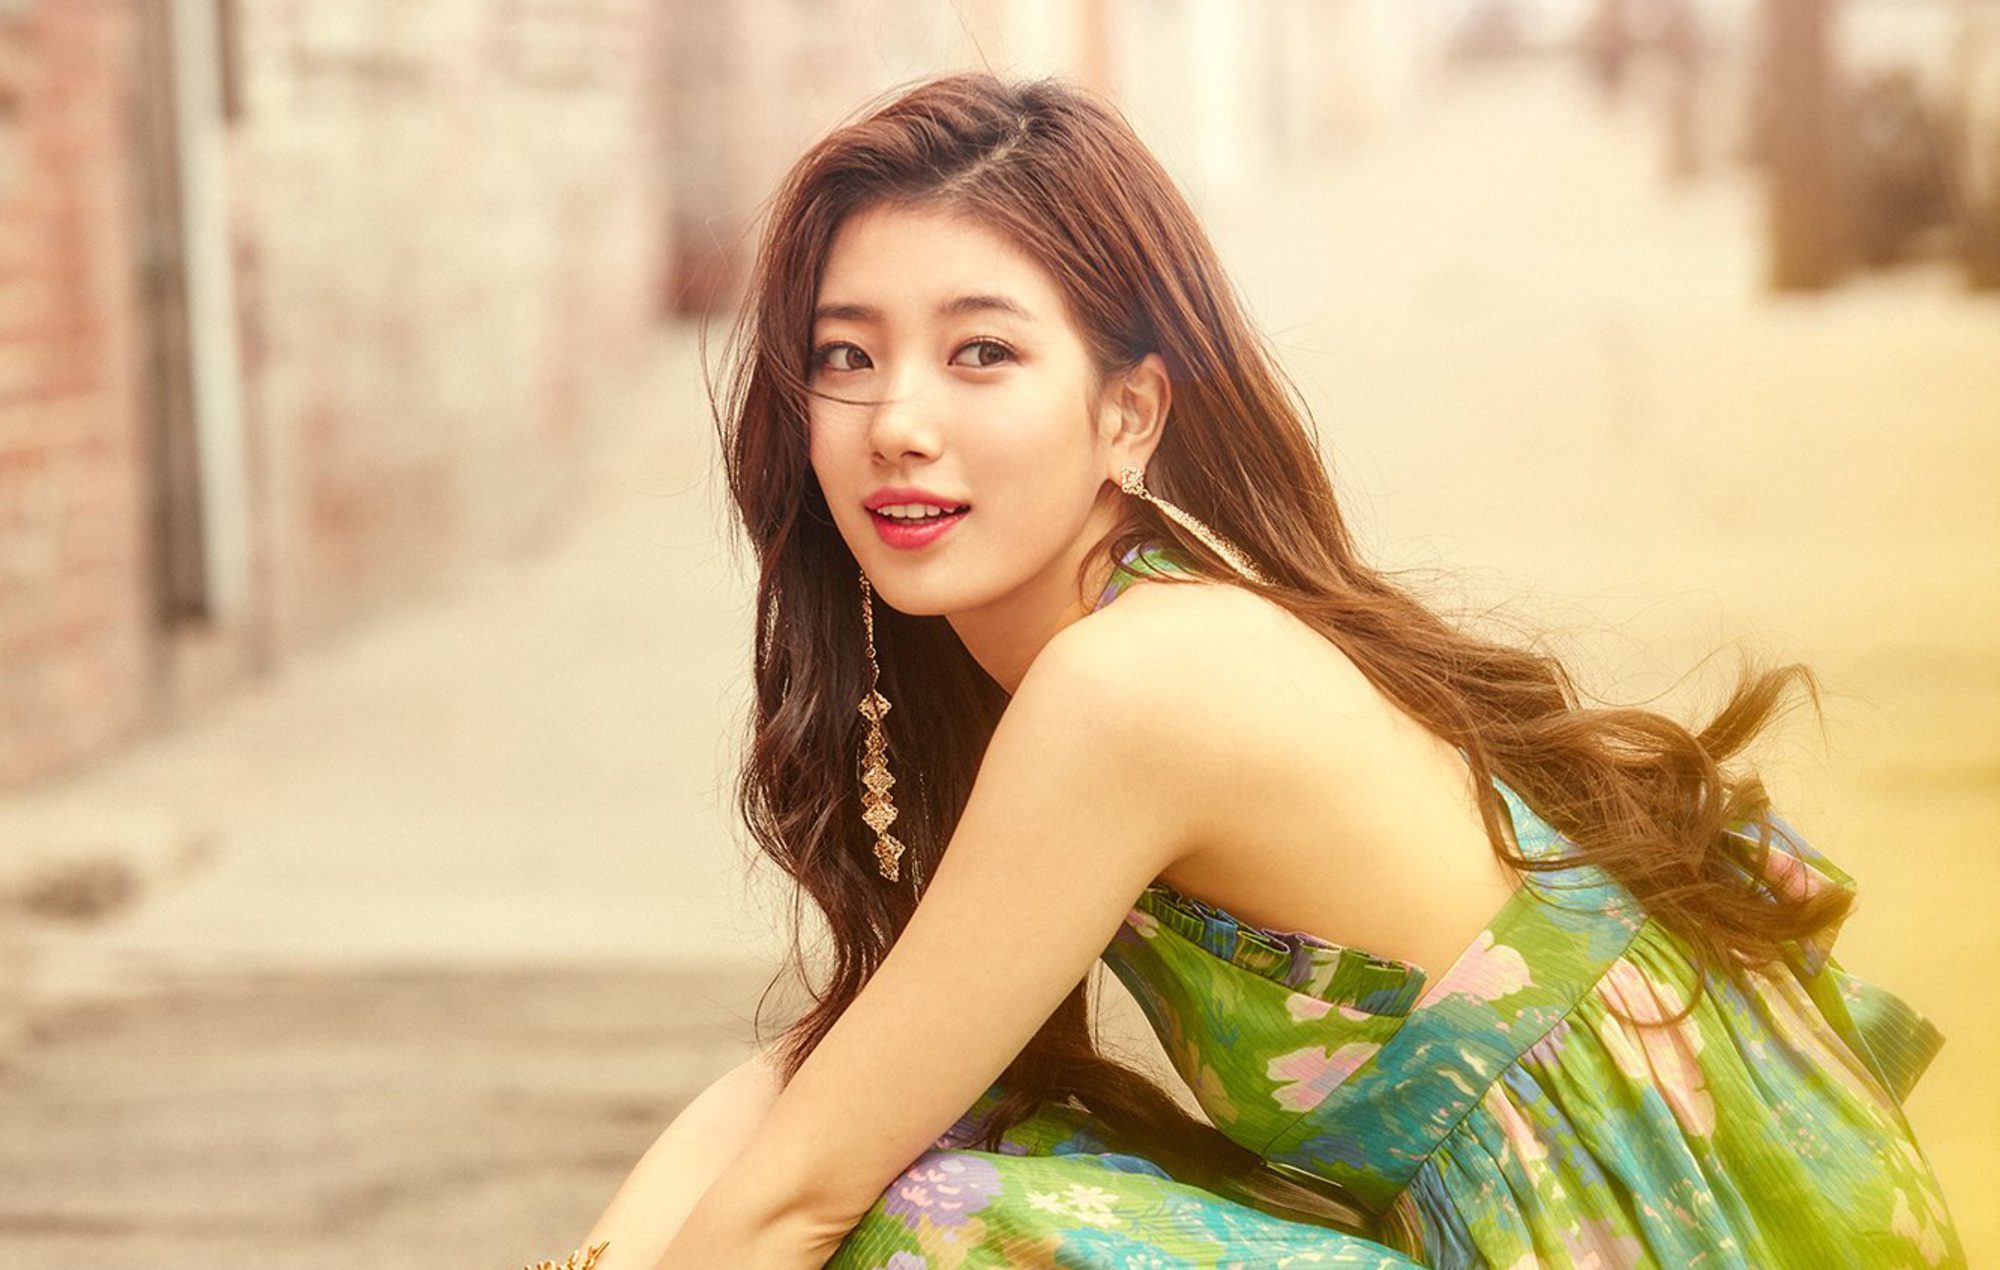 Bae Suzy Talks About Her Unique Character in The Upcoming Drama “Anna”